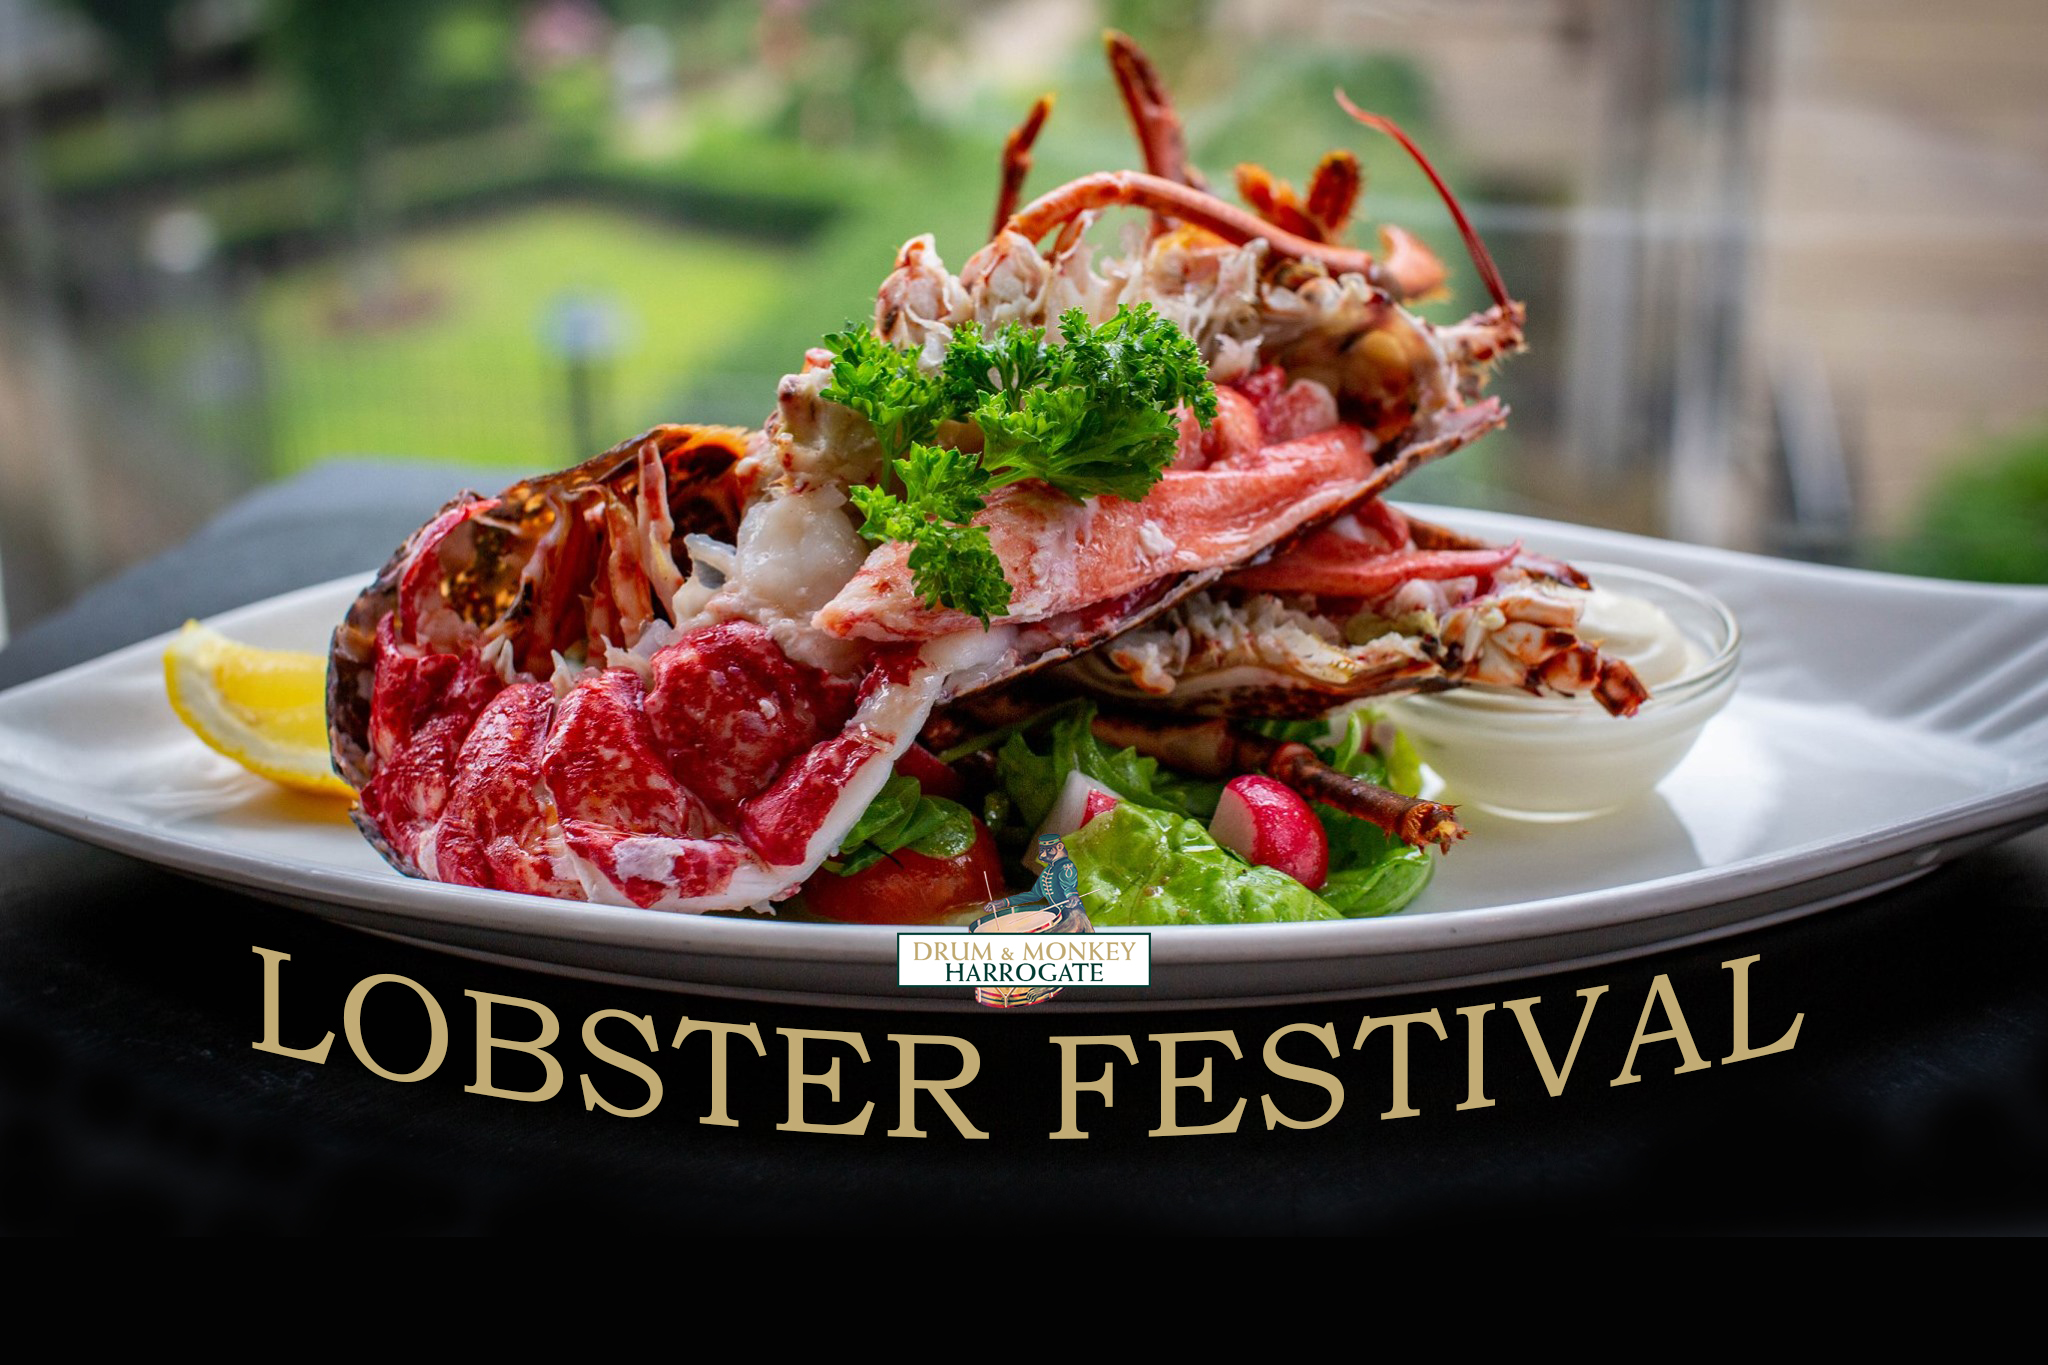 Lobster Festival is back!!! for a limited time only Lobster Festival